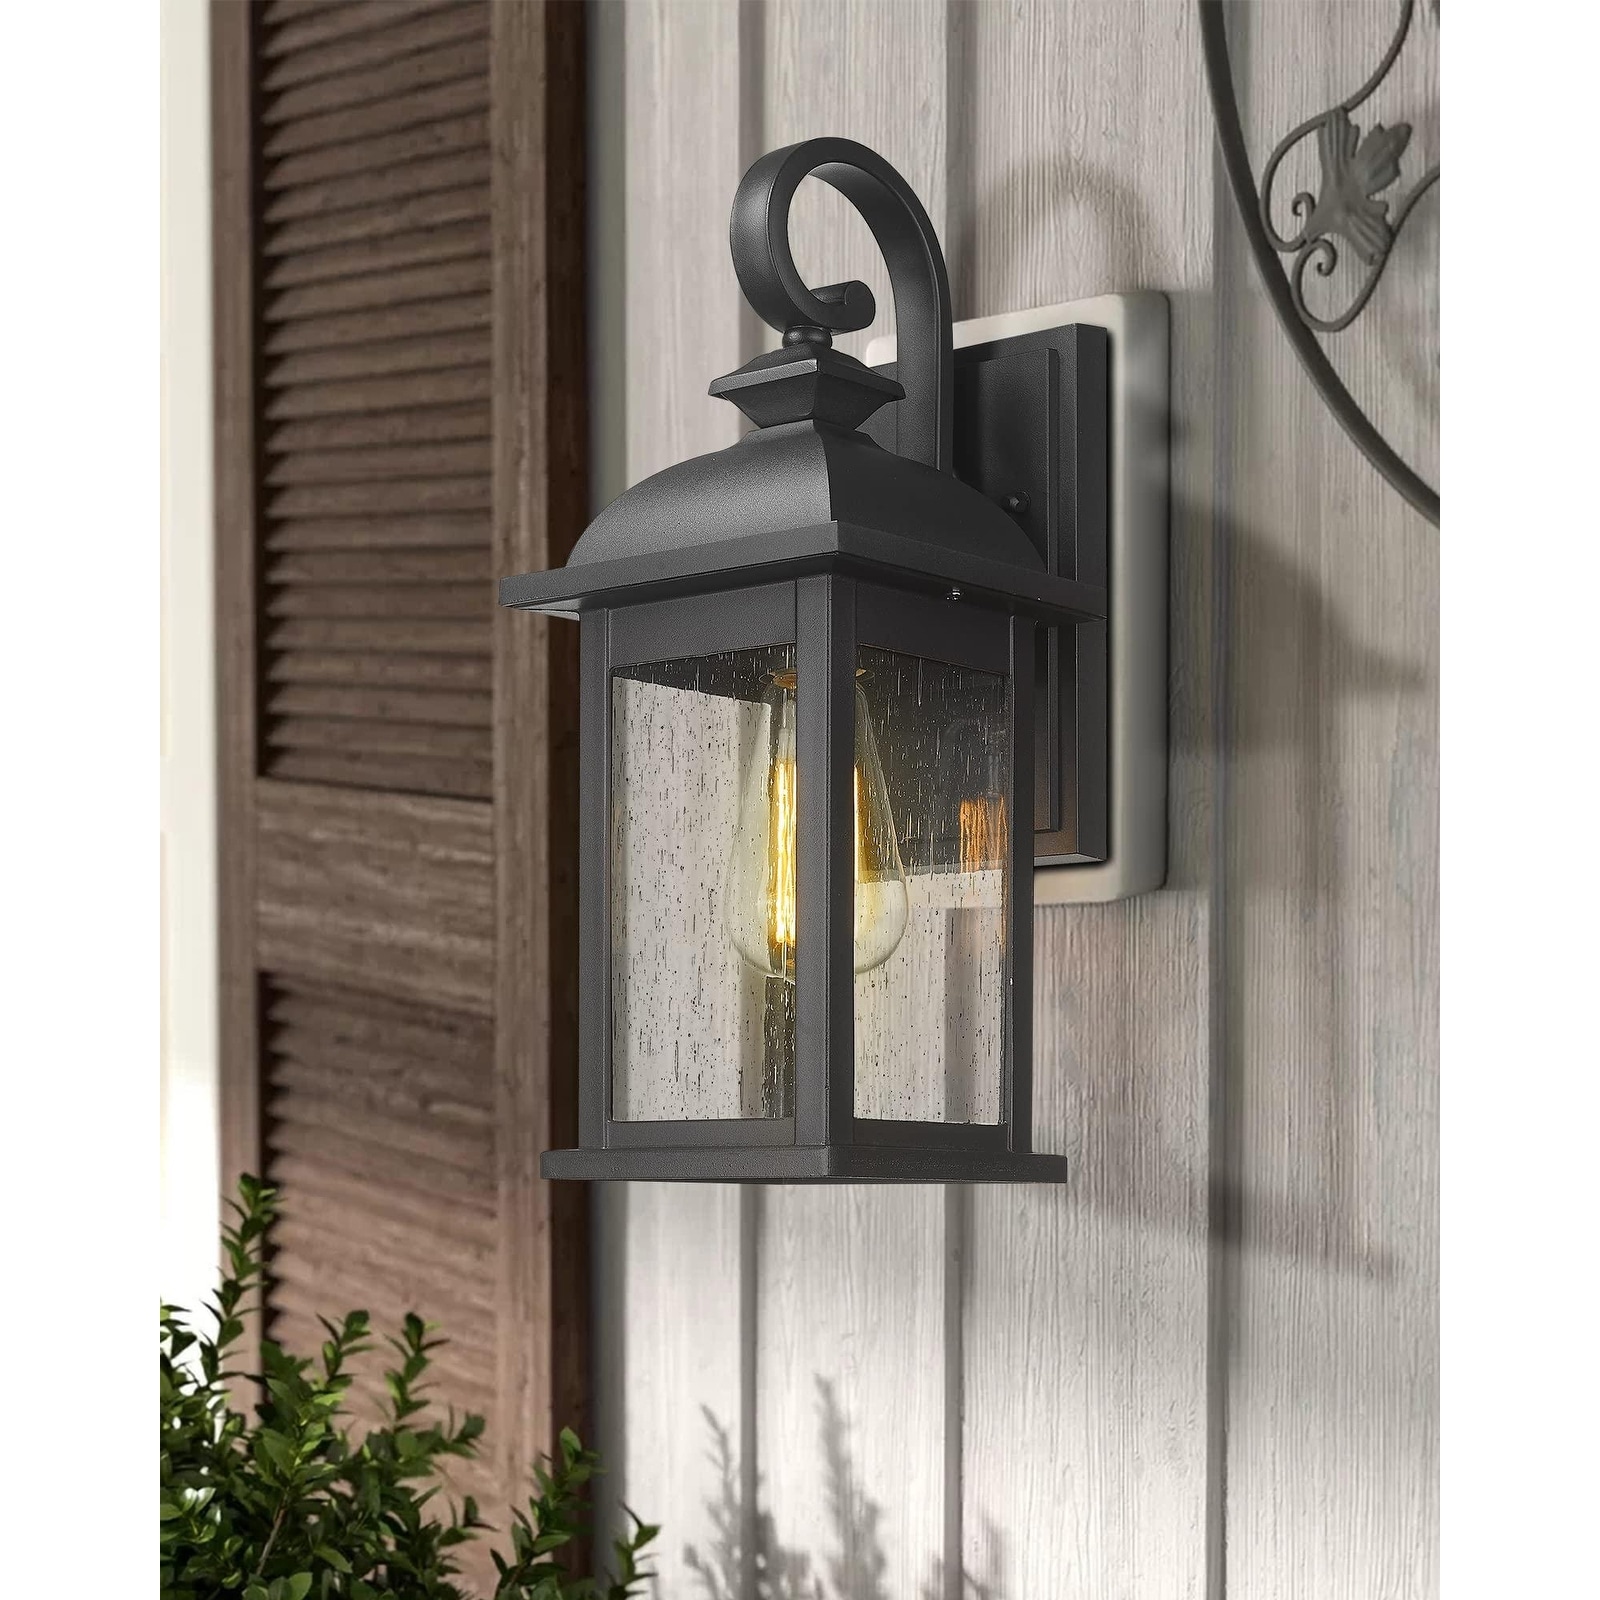 1-Light Exterior Waterproof Wall Sconce,E26 Socket Front Porch Lights,Anti-Rust  Matte Black Finish with Seeded Glass Lampshade On Sale Bed Bath   Beyond 36936914